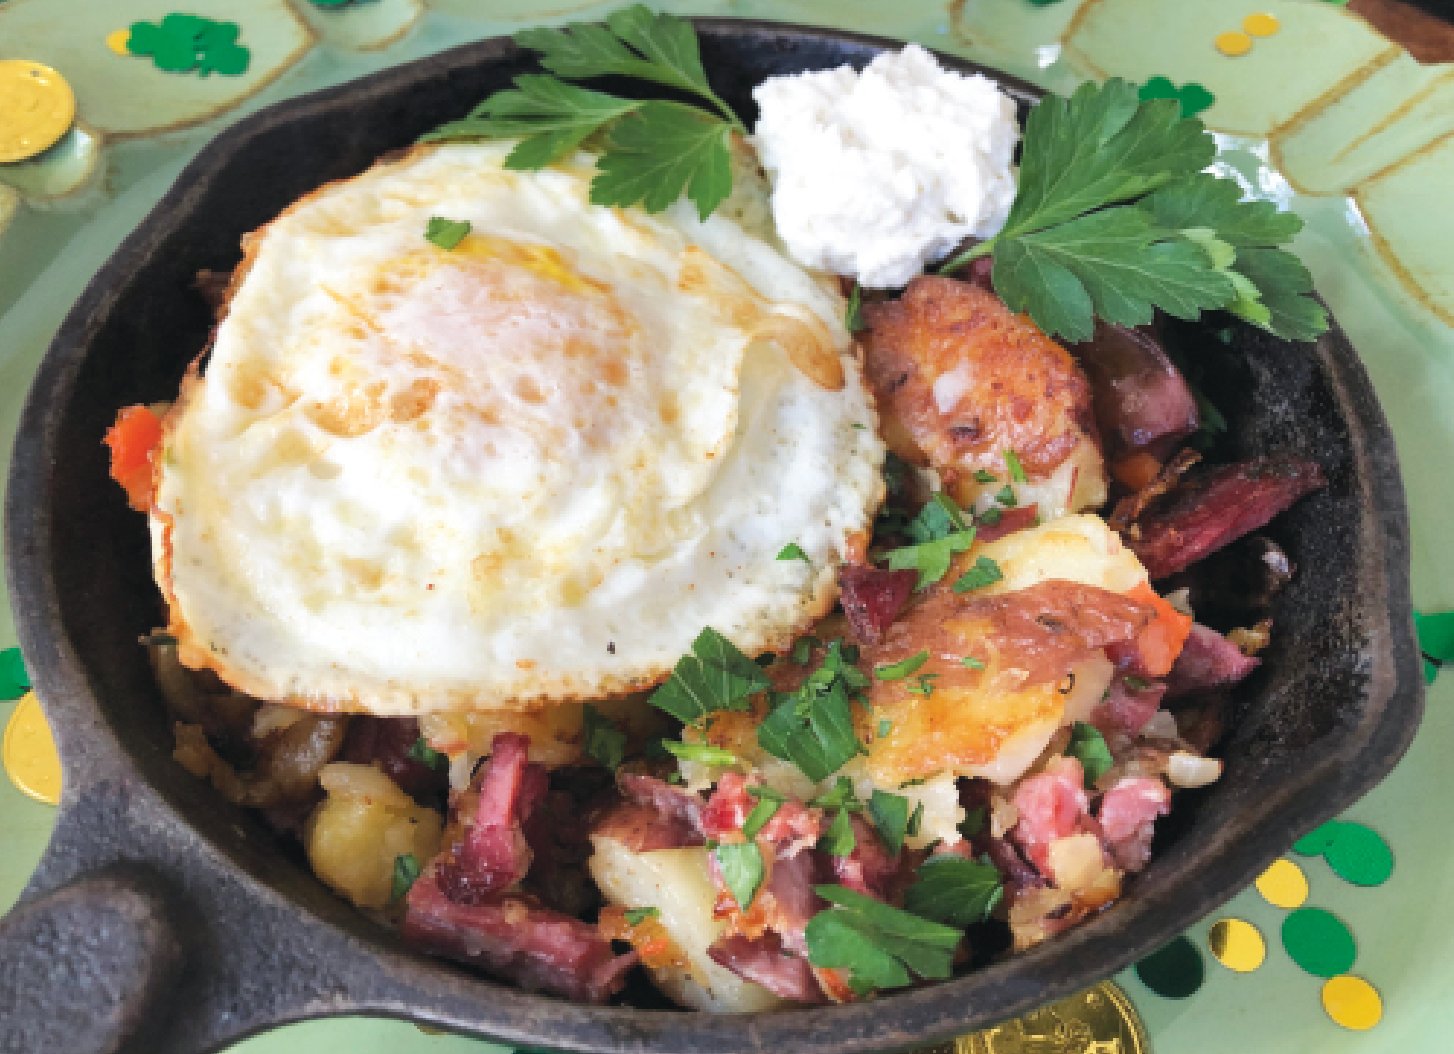 Smashed potatoes serve as the base of this corned beef hash topped by a fried egg and accompanied by a dollop of fresh horseradish sauce.